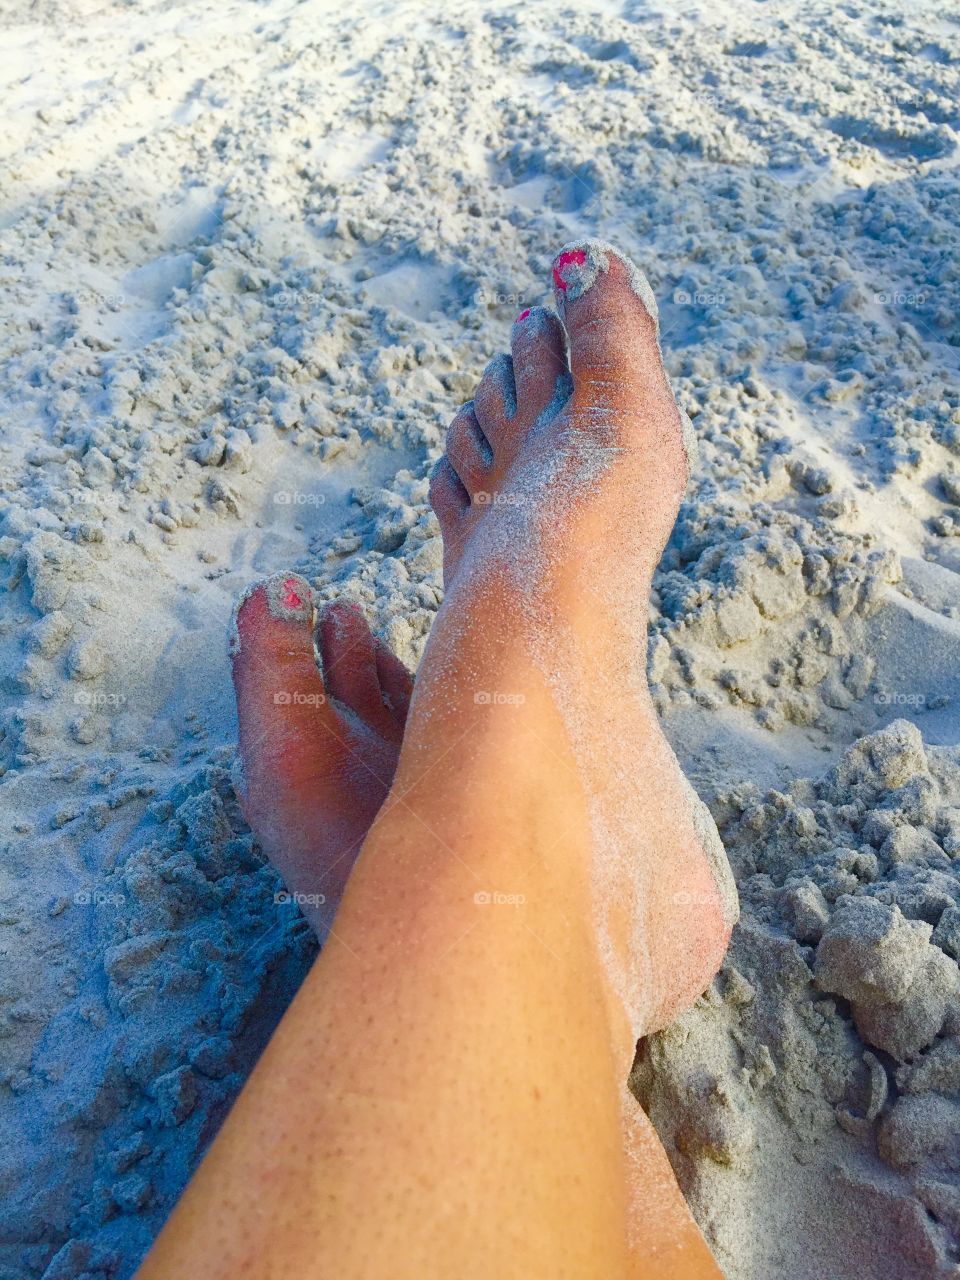 The best summertime feeling. Sand between your toes. 